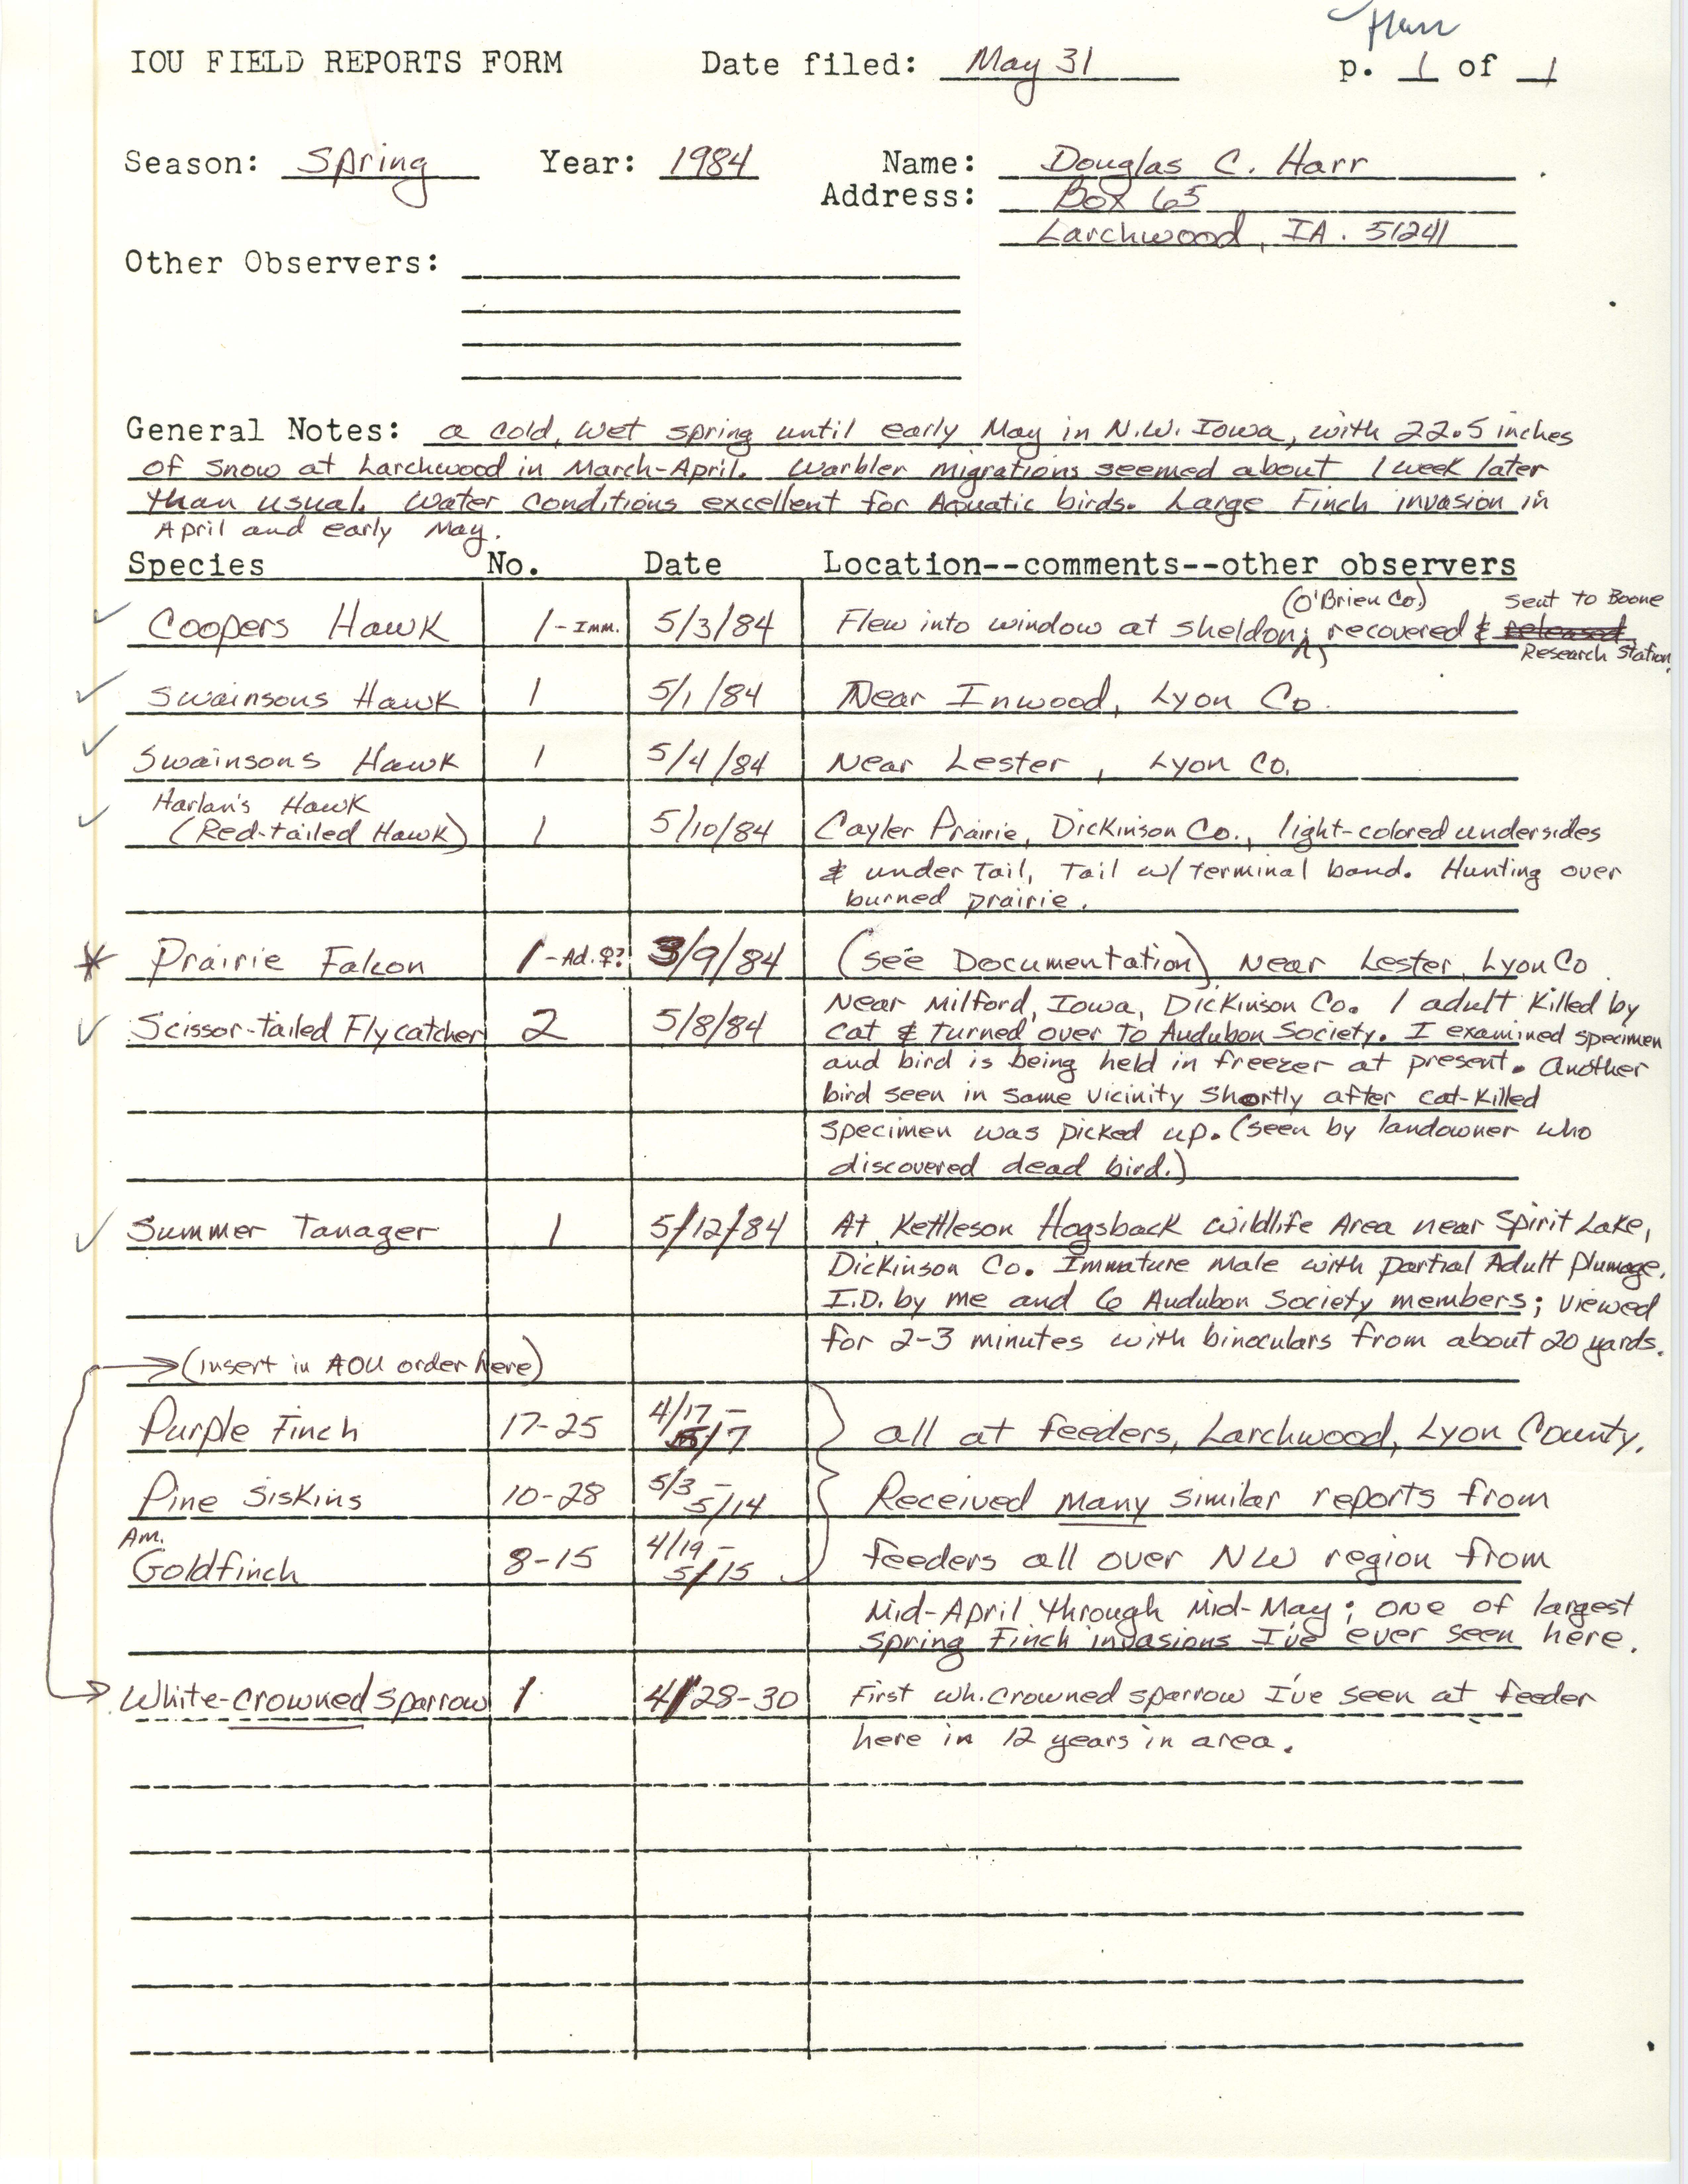 Field notes contributed by Douglas C. Harr, Larchwood, Iowa, May 31, 1984